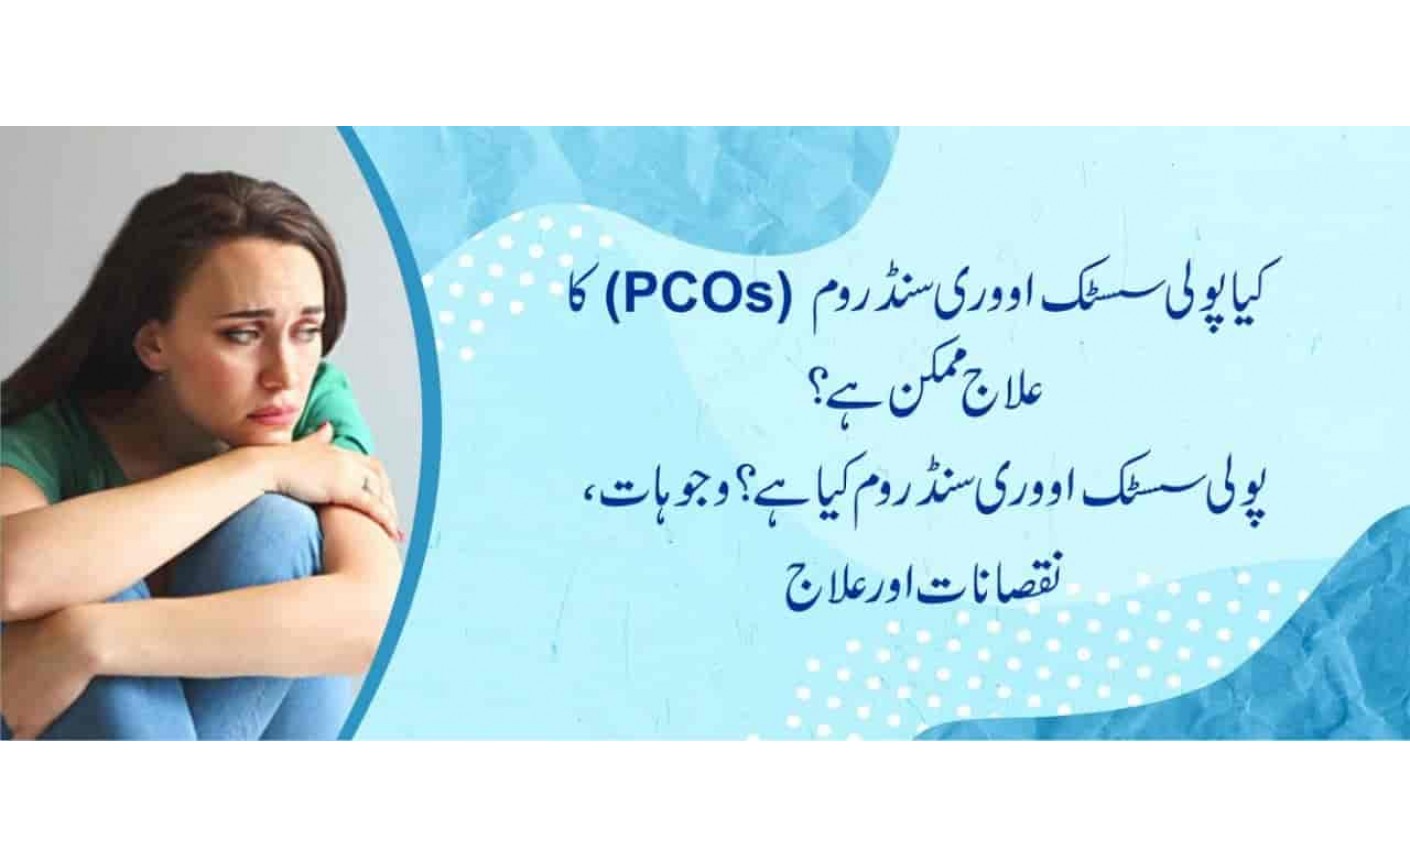 What is PCOS (Polycystic Ovary Syndrome)?